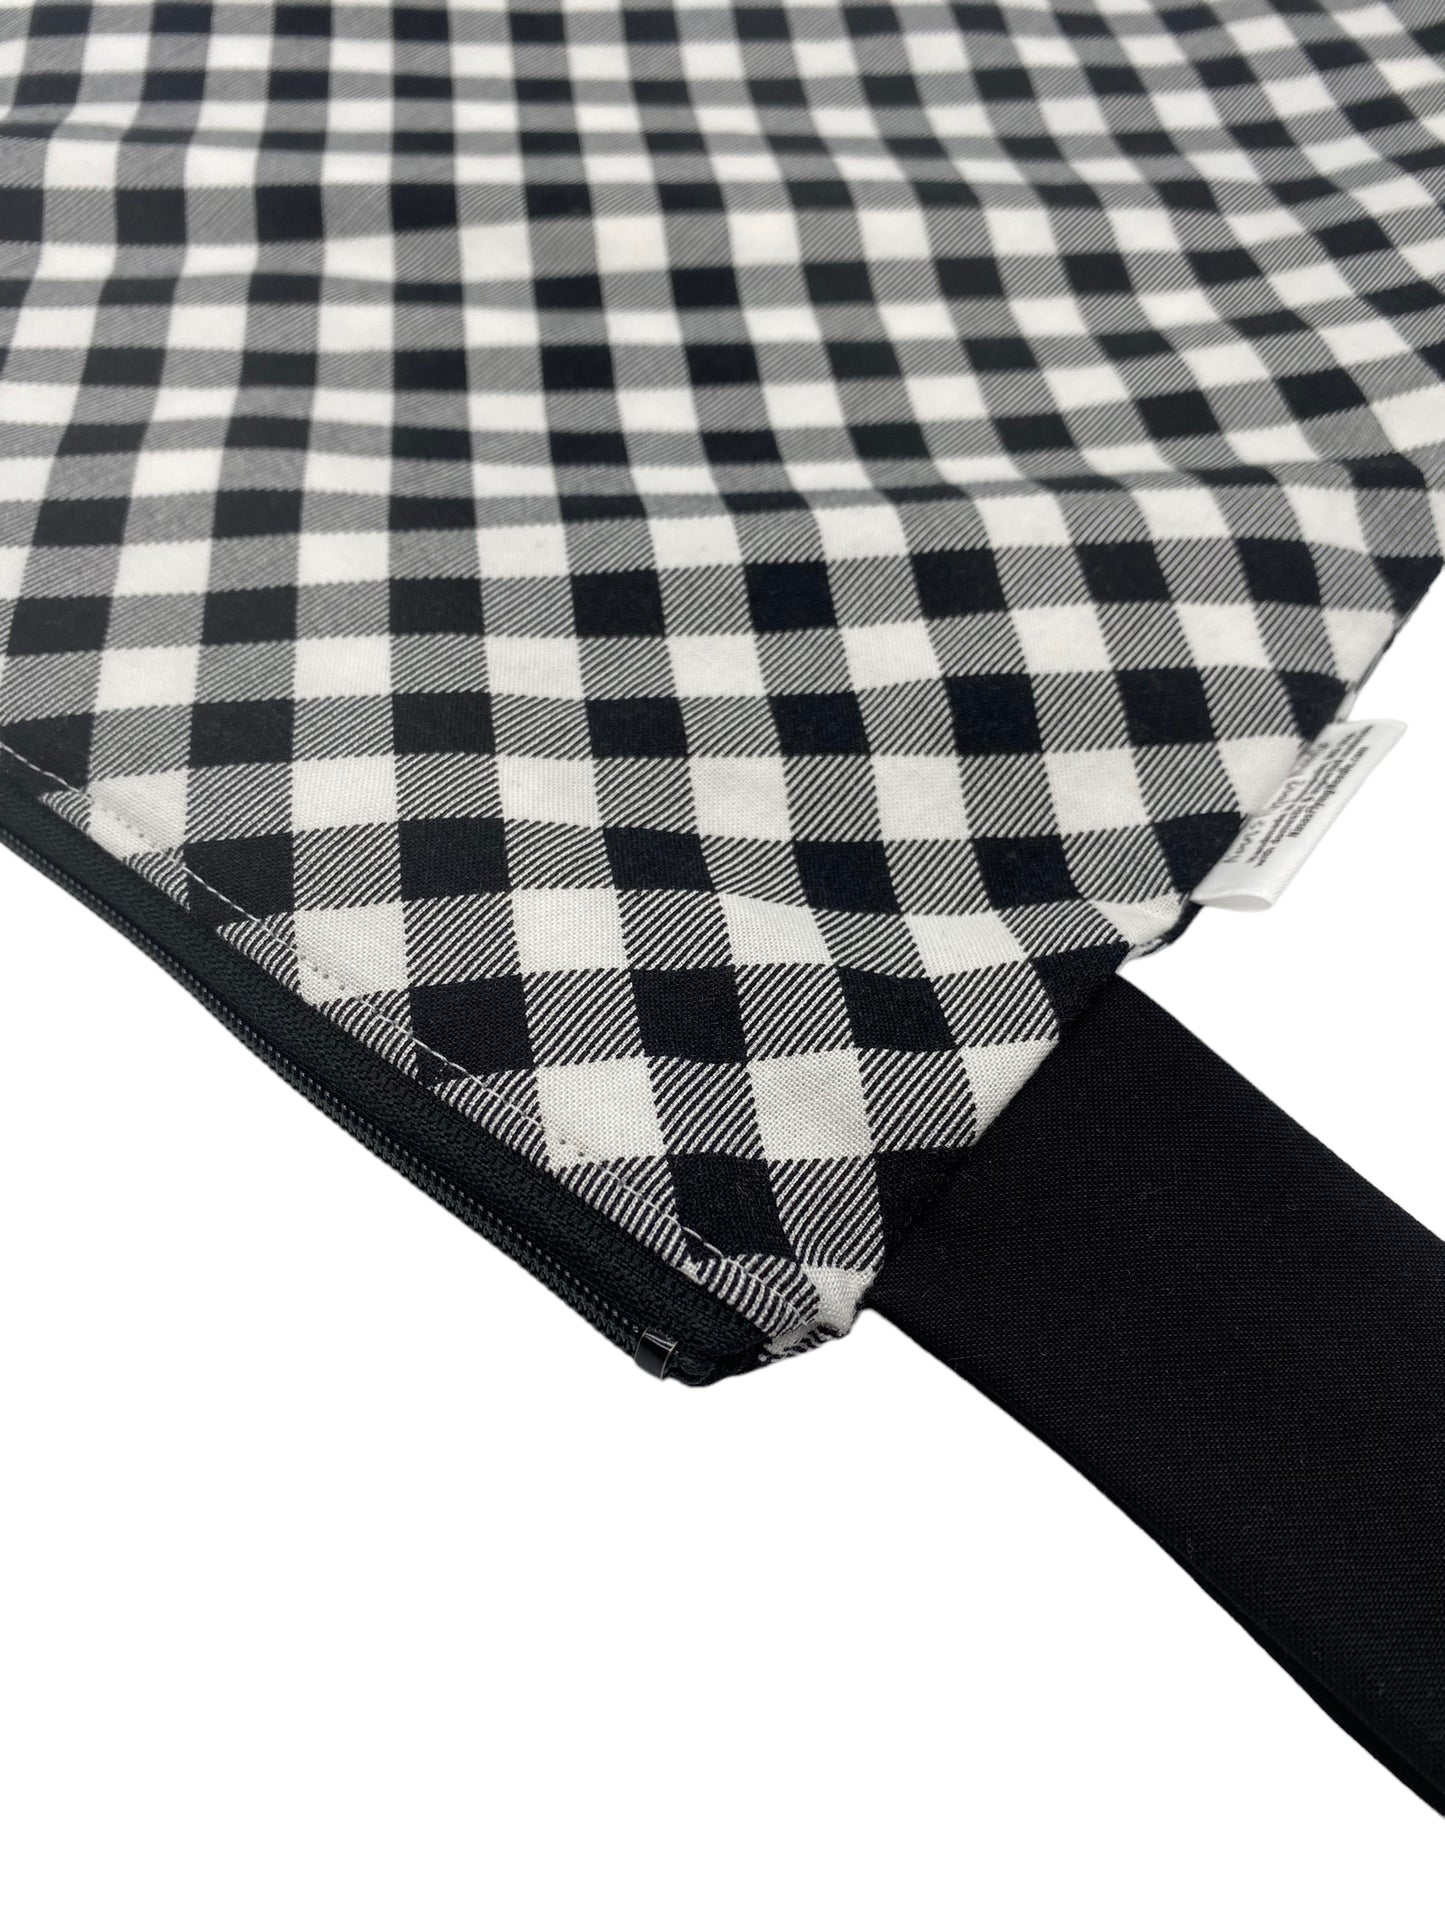 Large Wet Bag with Handle Plaid Black White